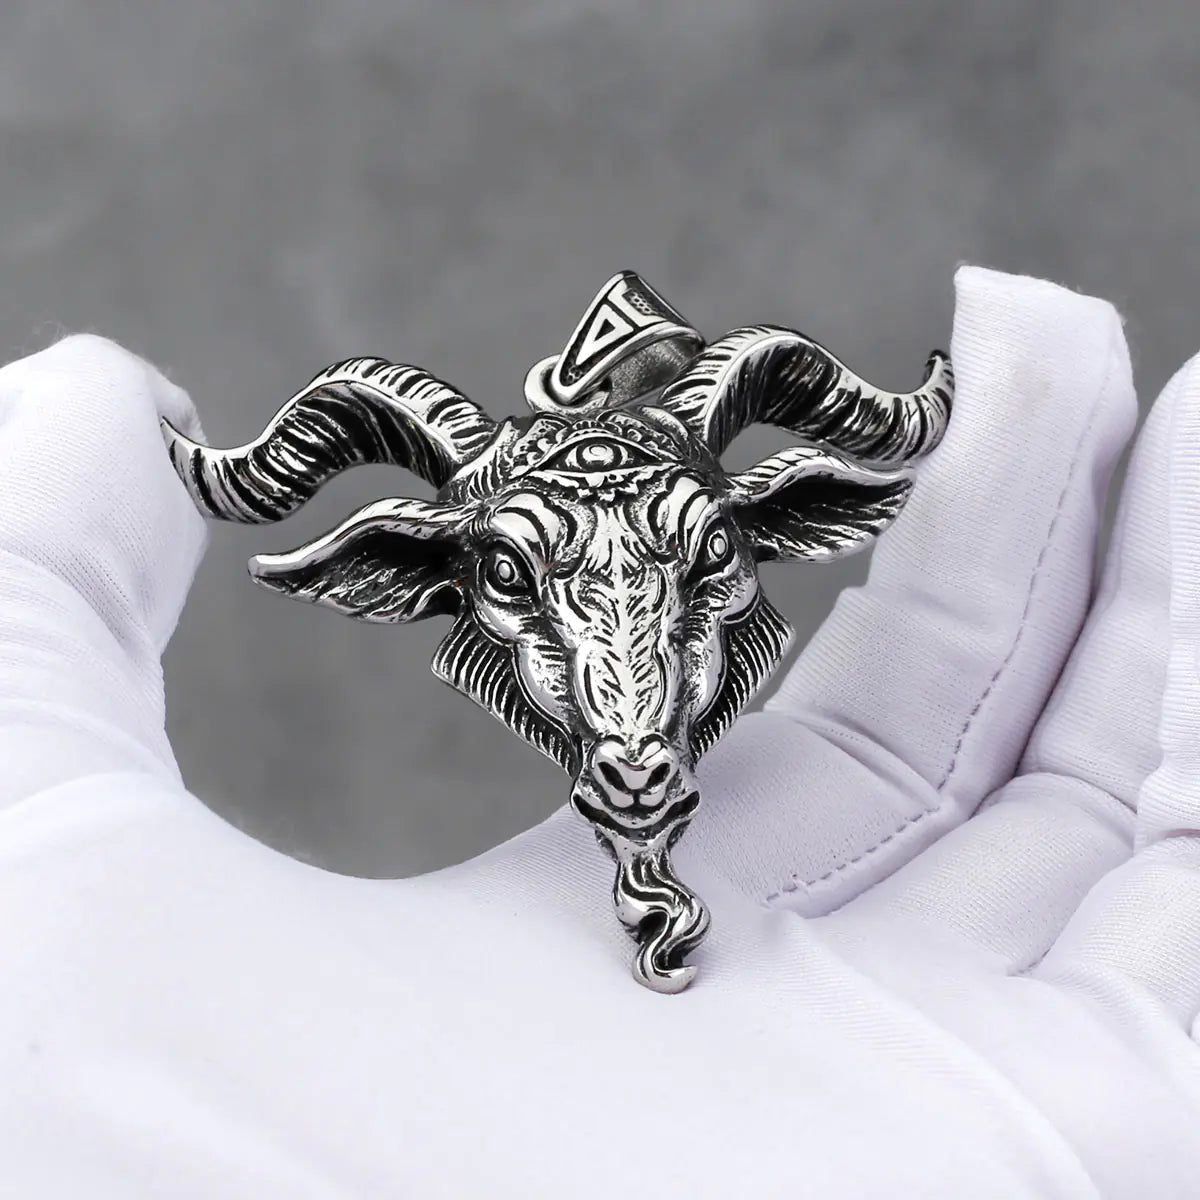 Stainless Steel Viking Necklace